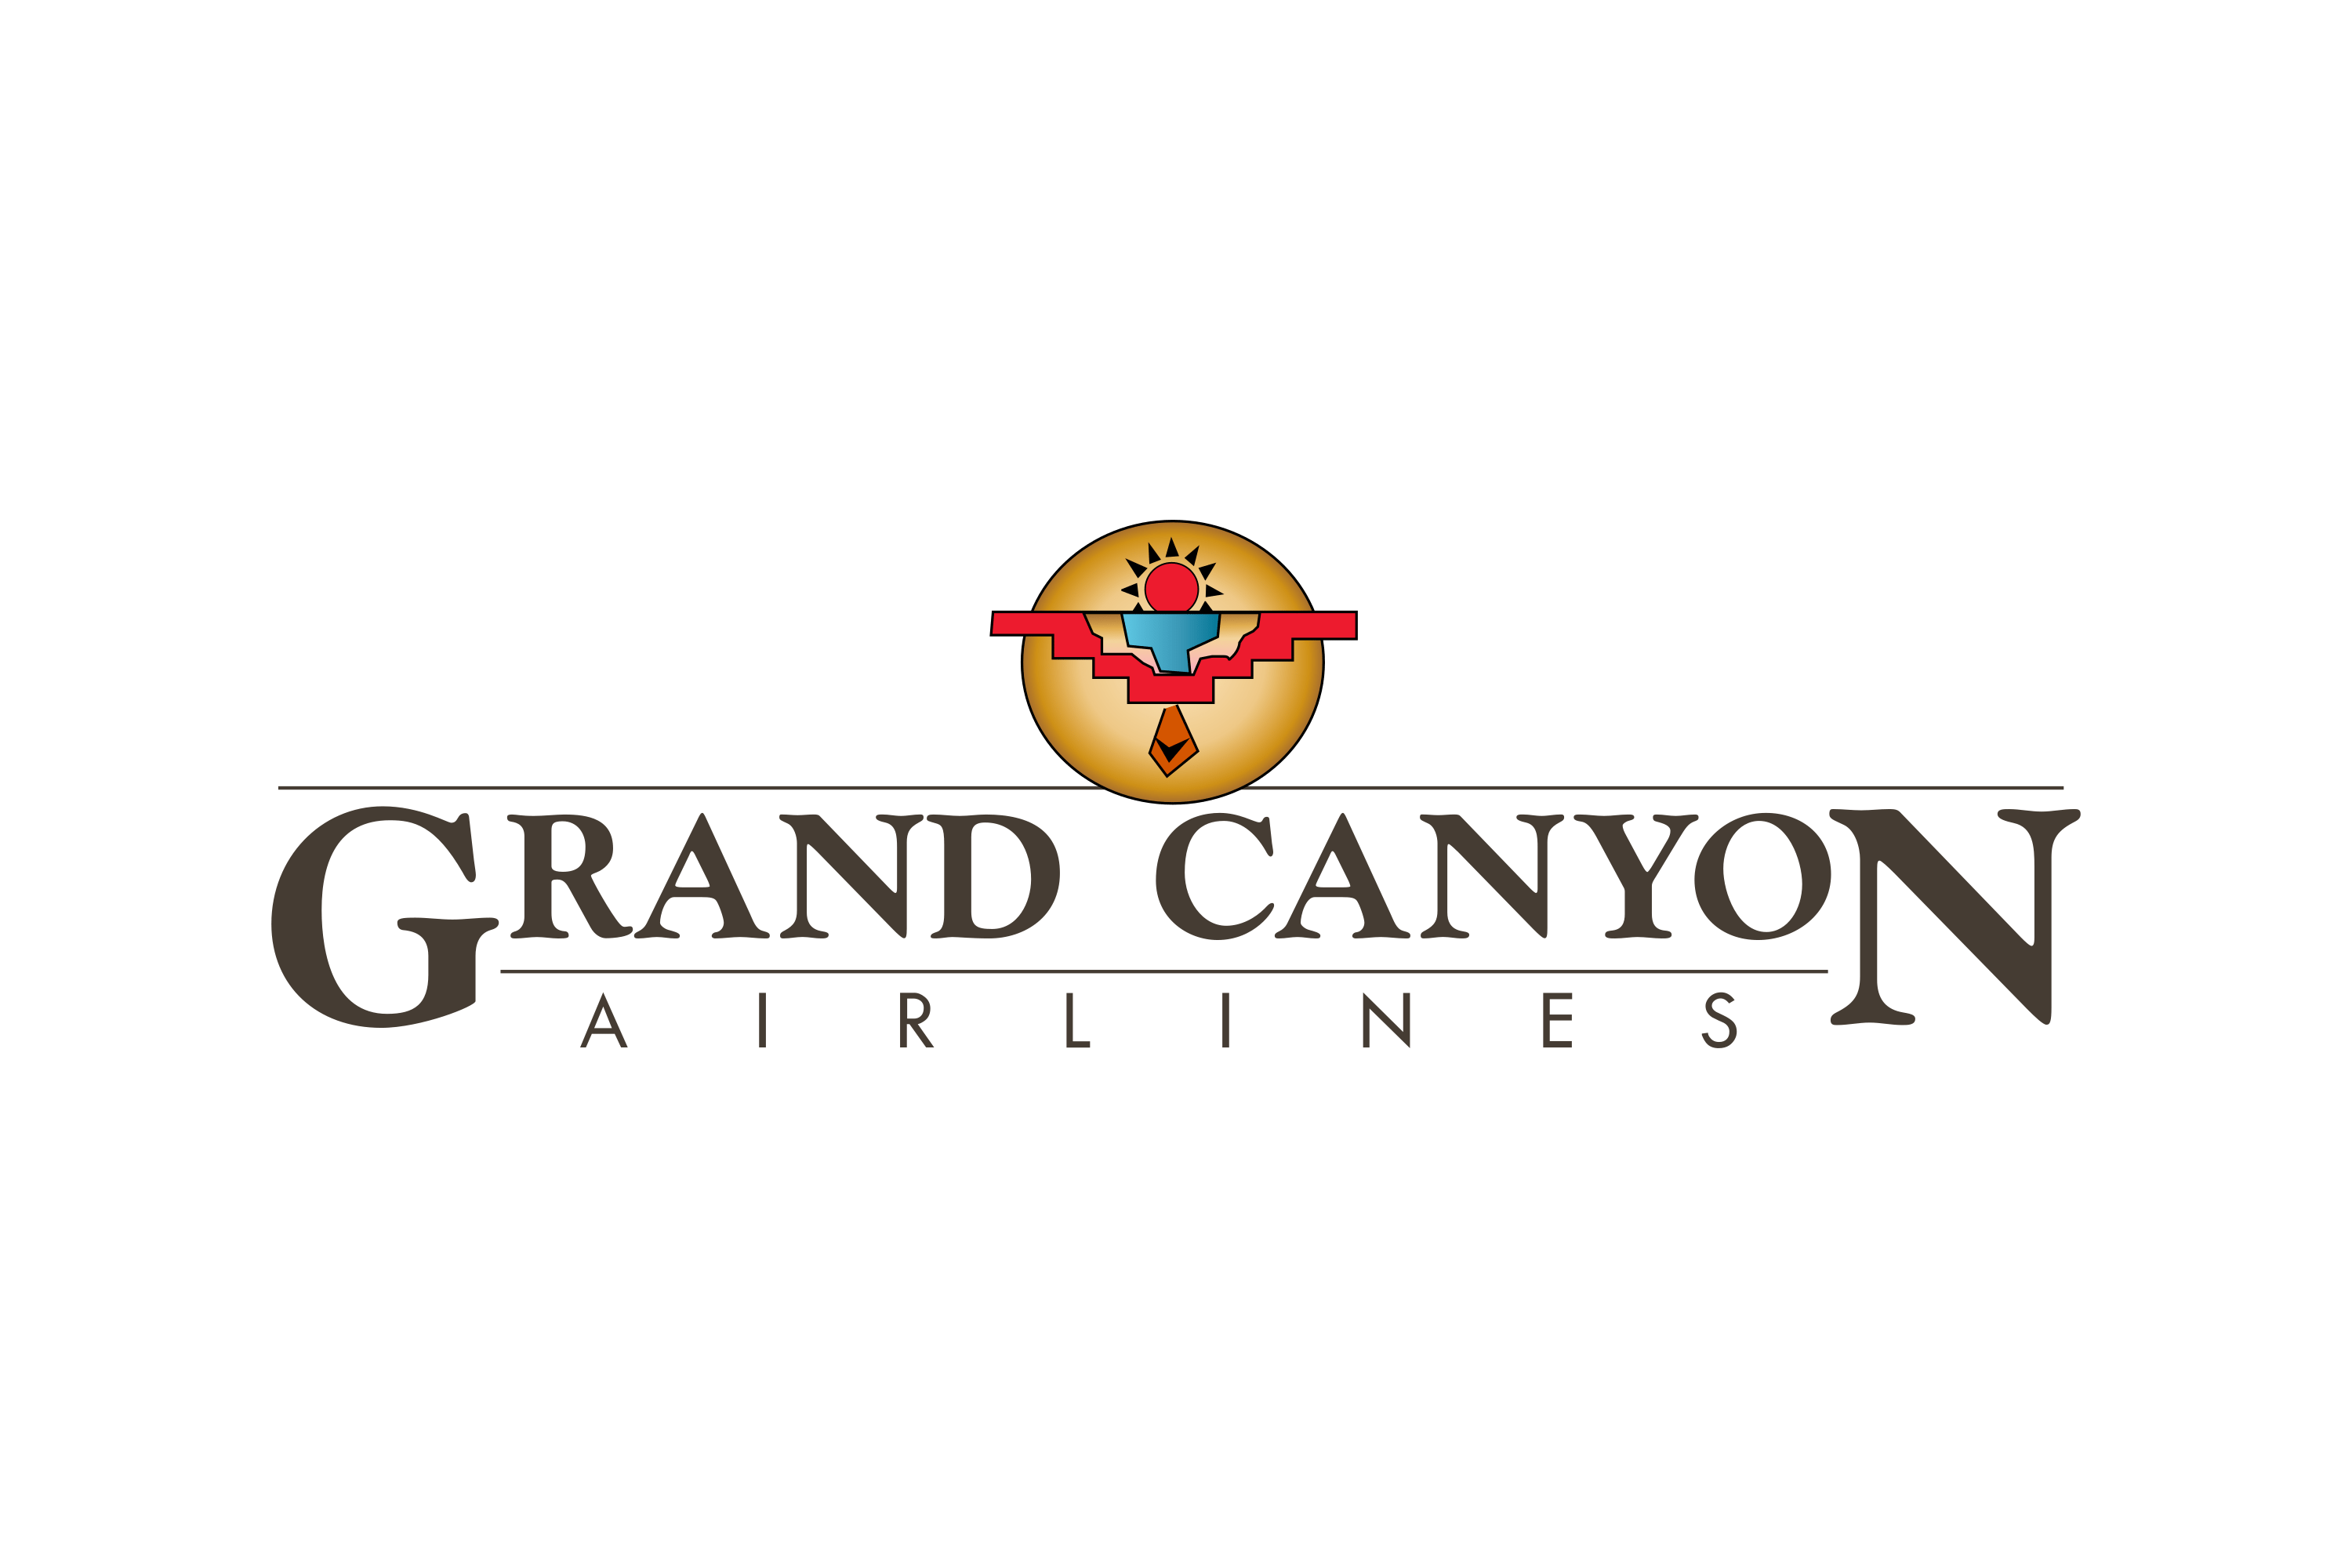 Download Grand Canyon Airlines Logo in SVG Vector or PNG File Format